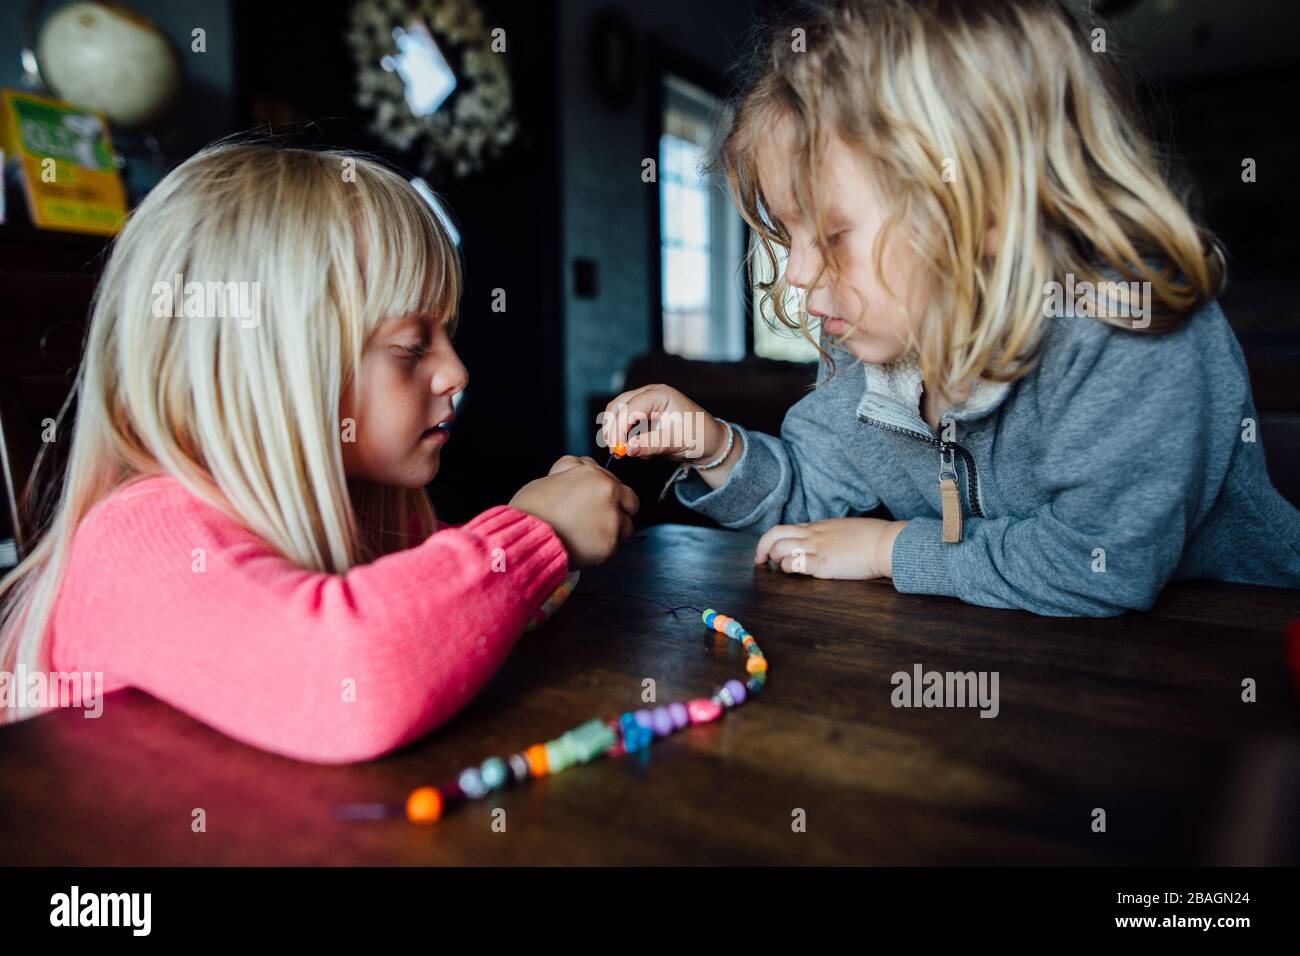 Little boy and girl making bead necklace at table during the day Stock Photo